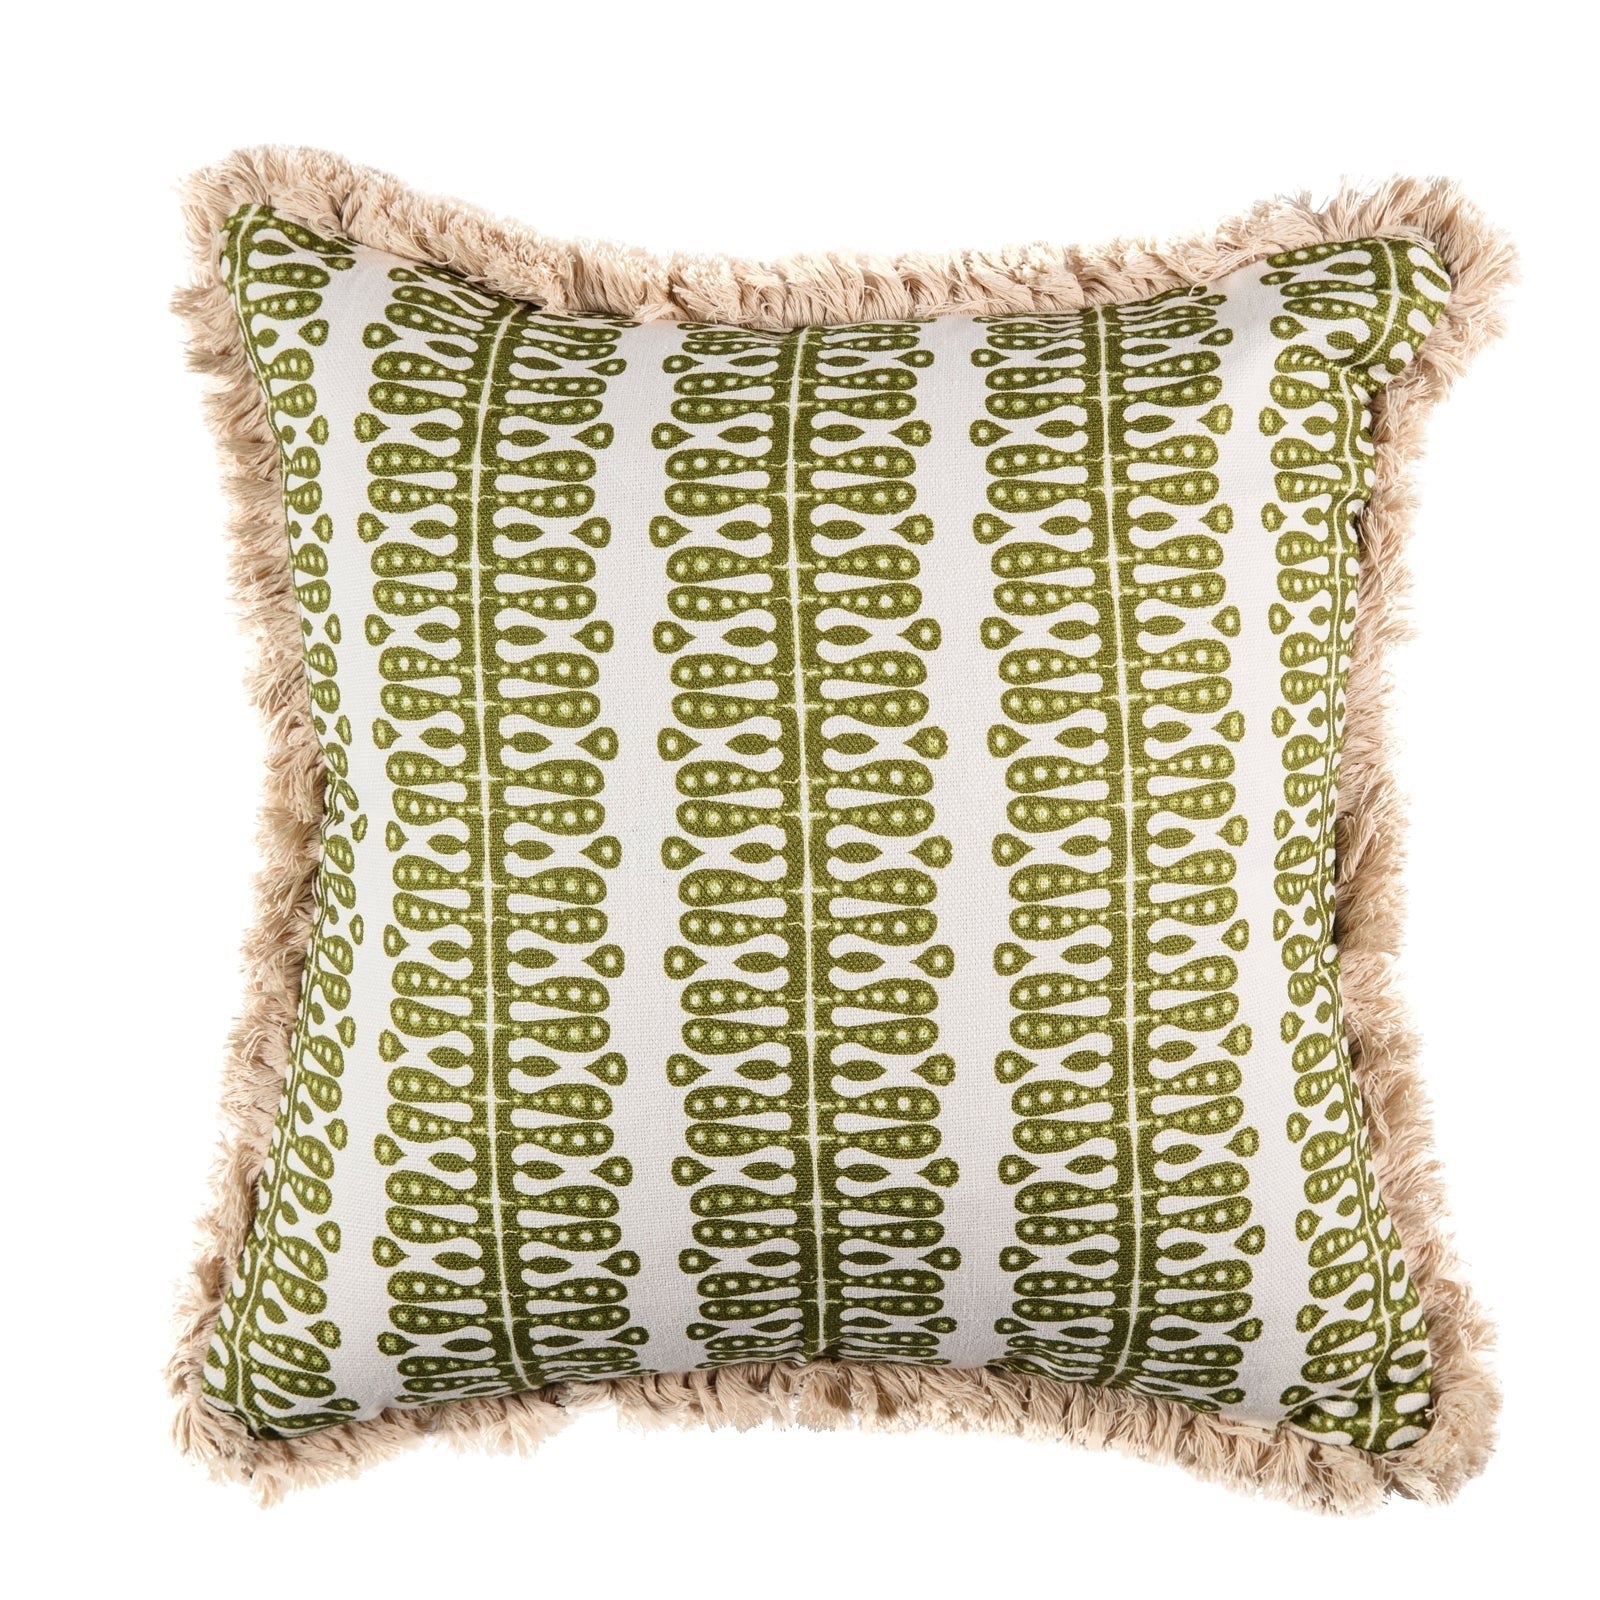 Heart and Minds Cushion in Peridot with Peridot velvet back and cream fringe